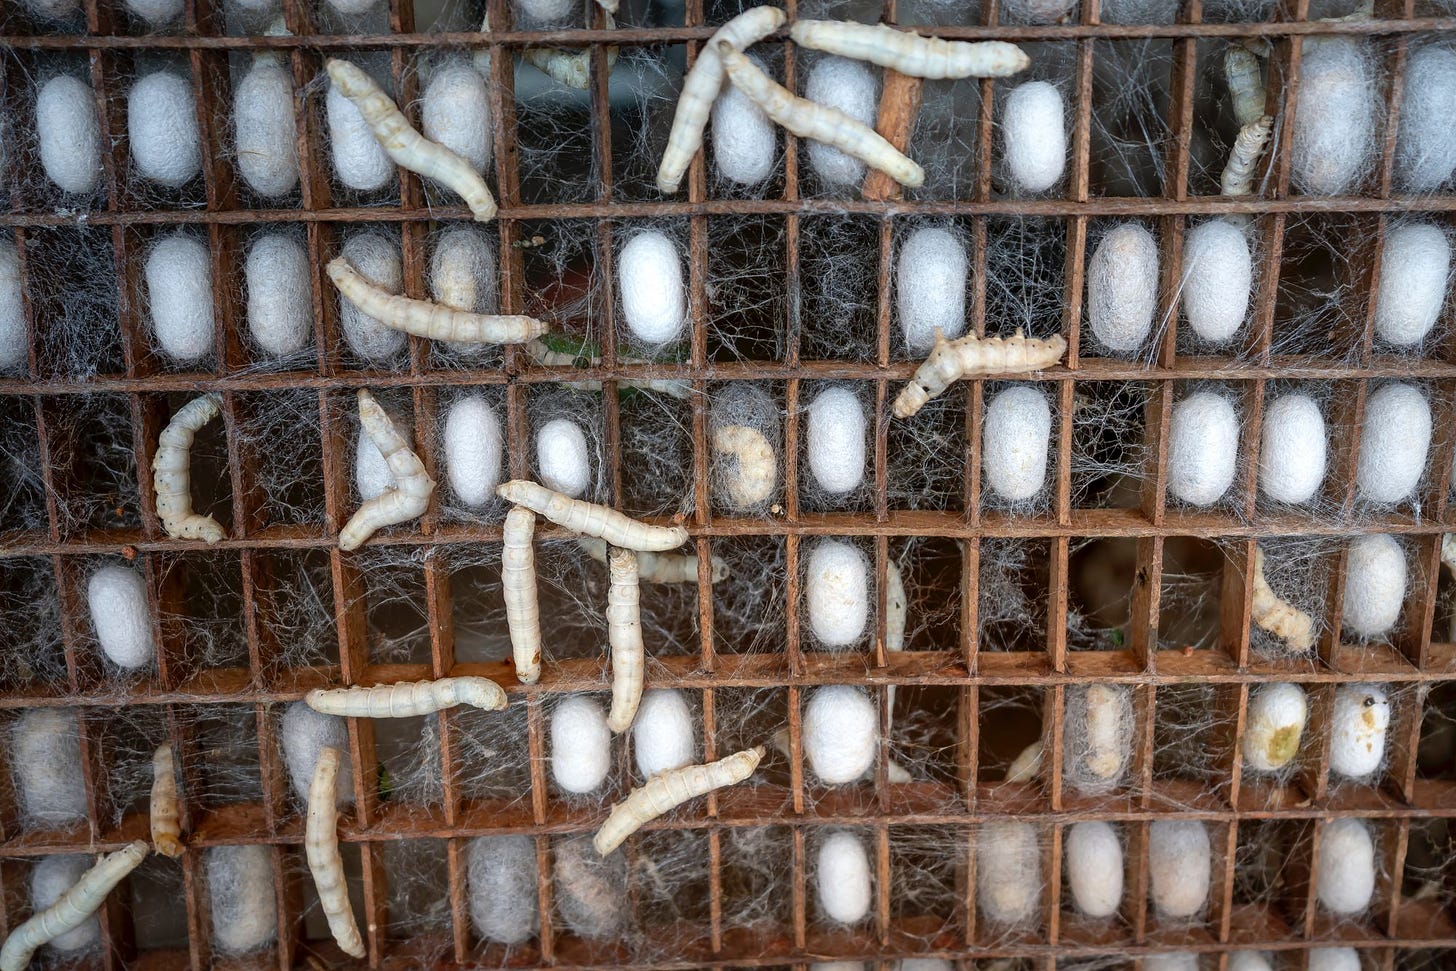 photo of silkworms in box by Quant Nguyen Vinh